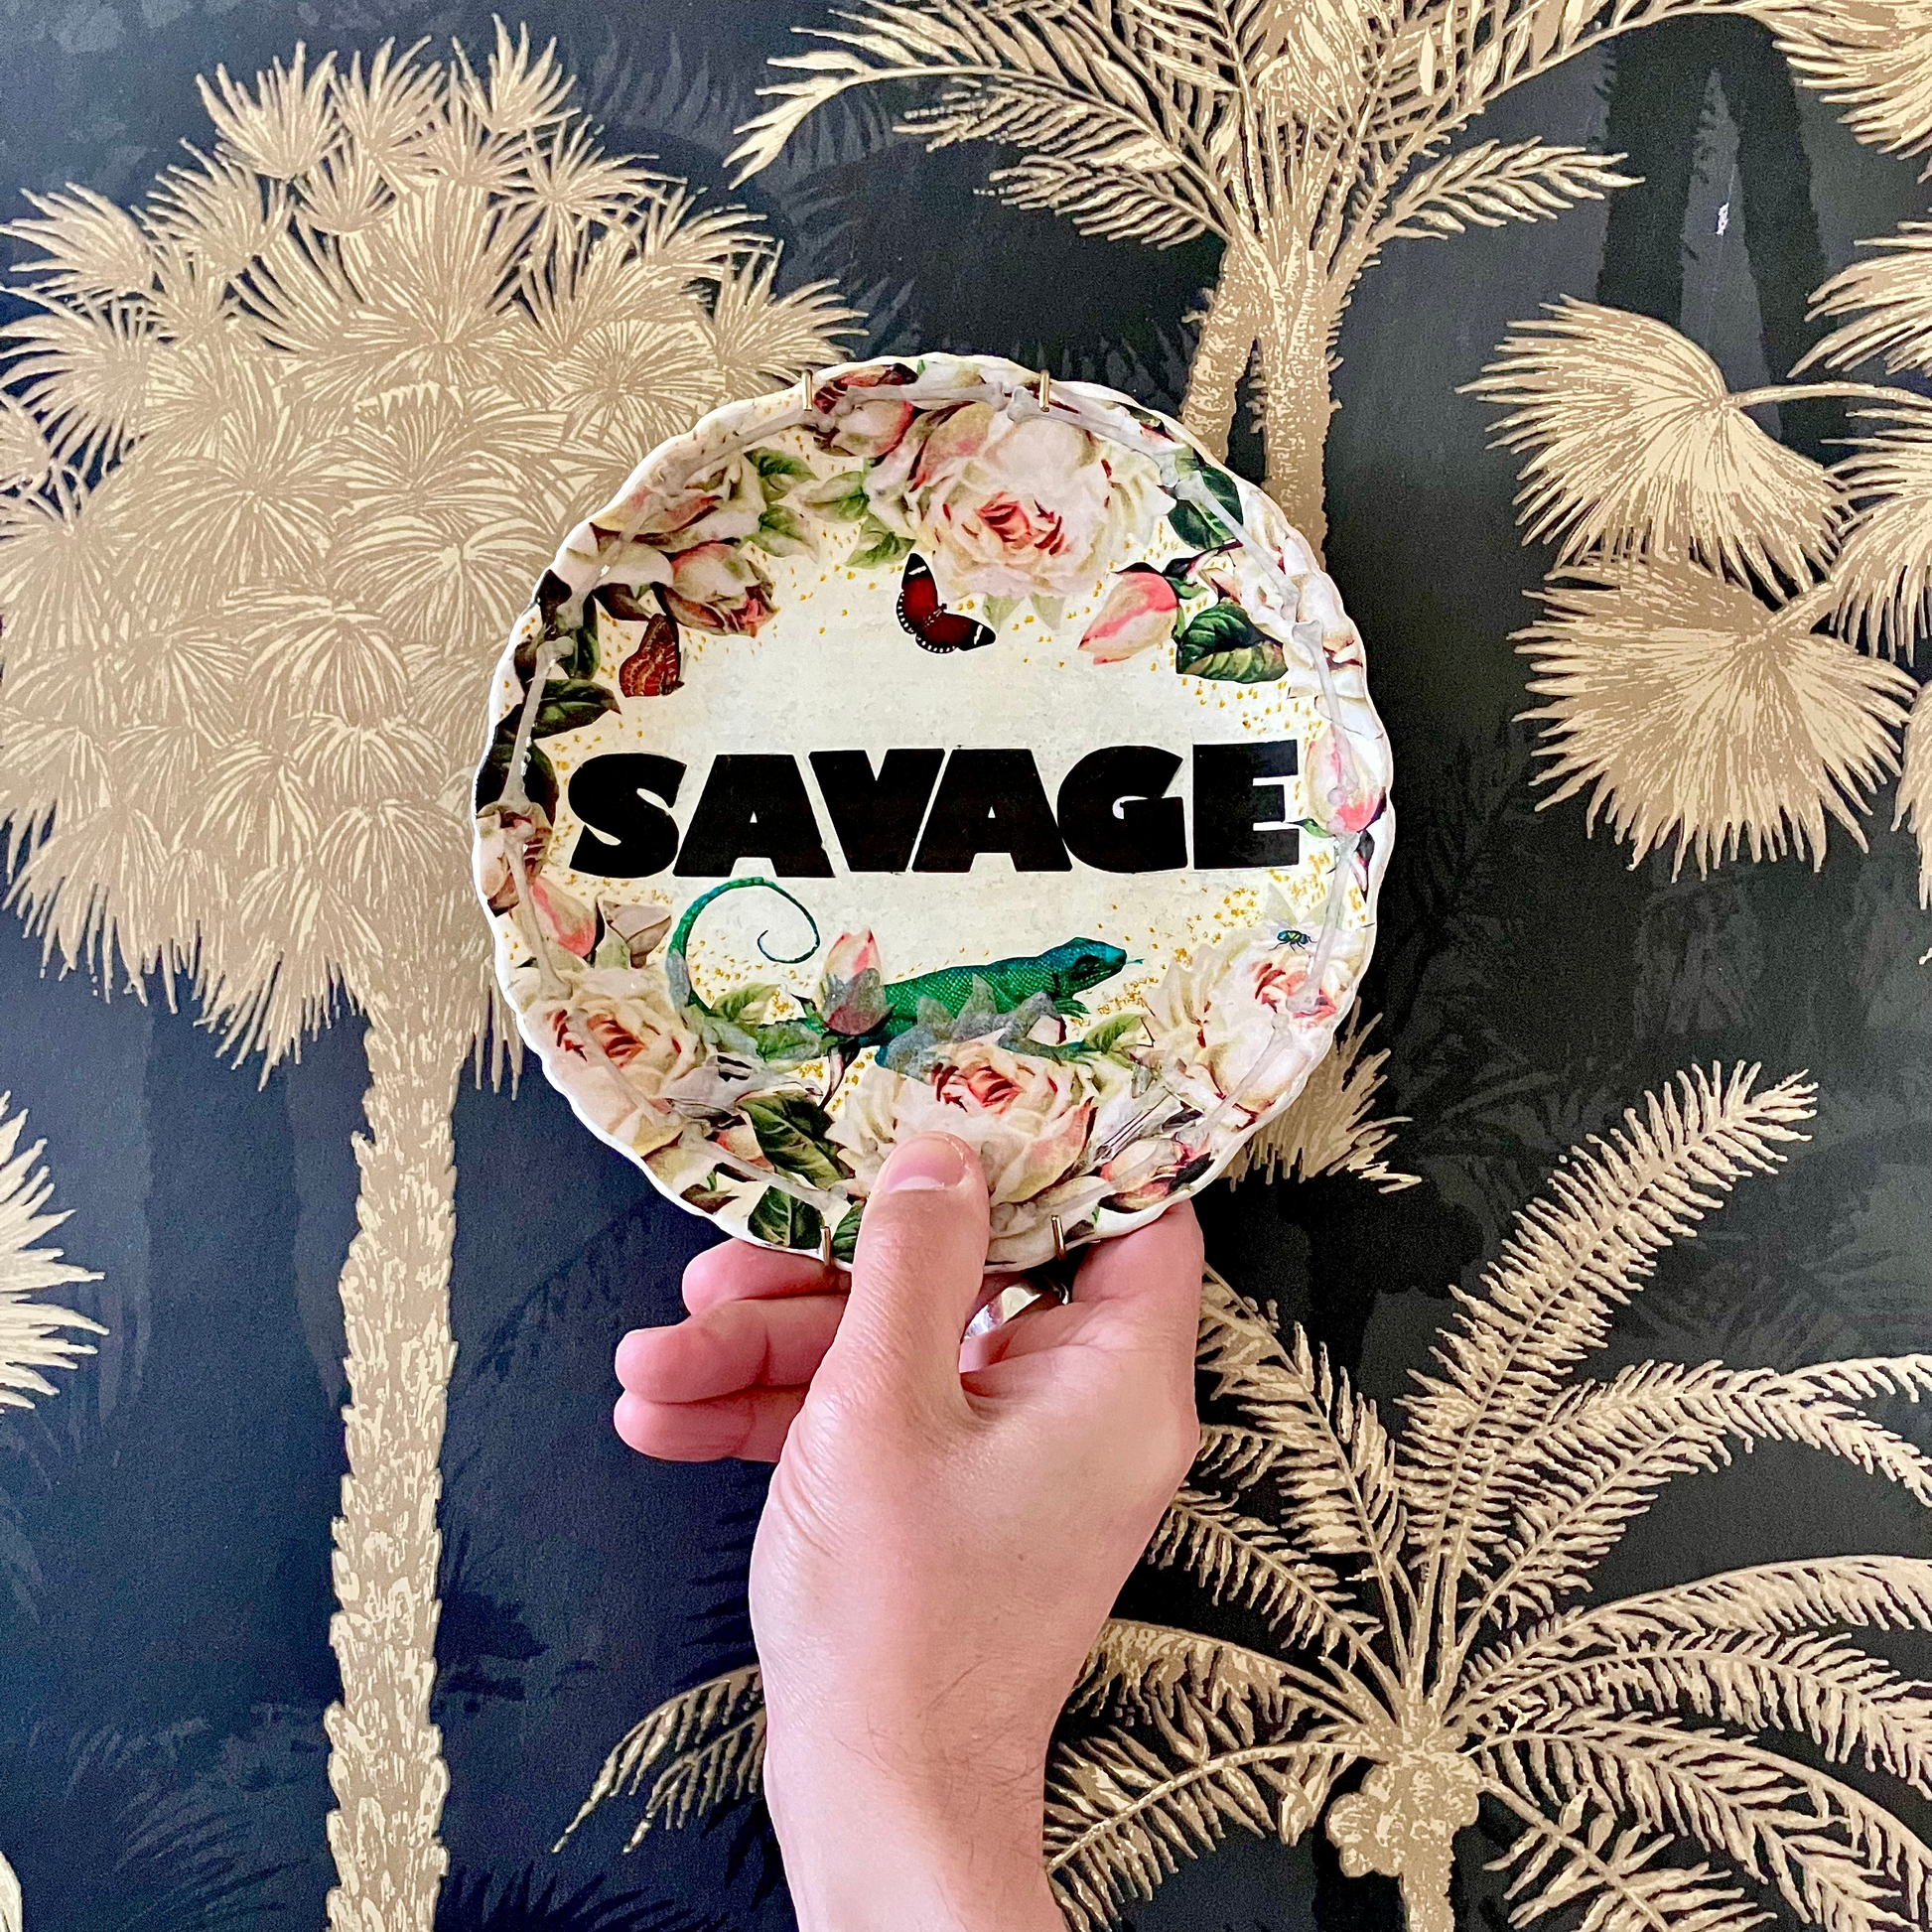 "Savage" Wall Plate by House of Frisson